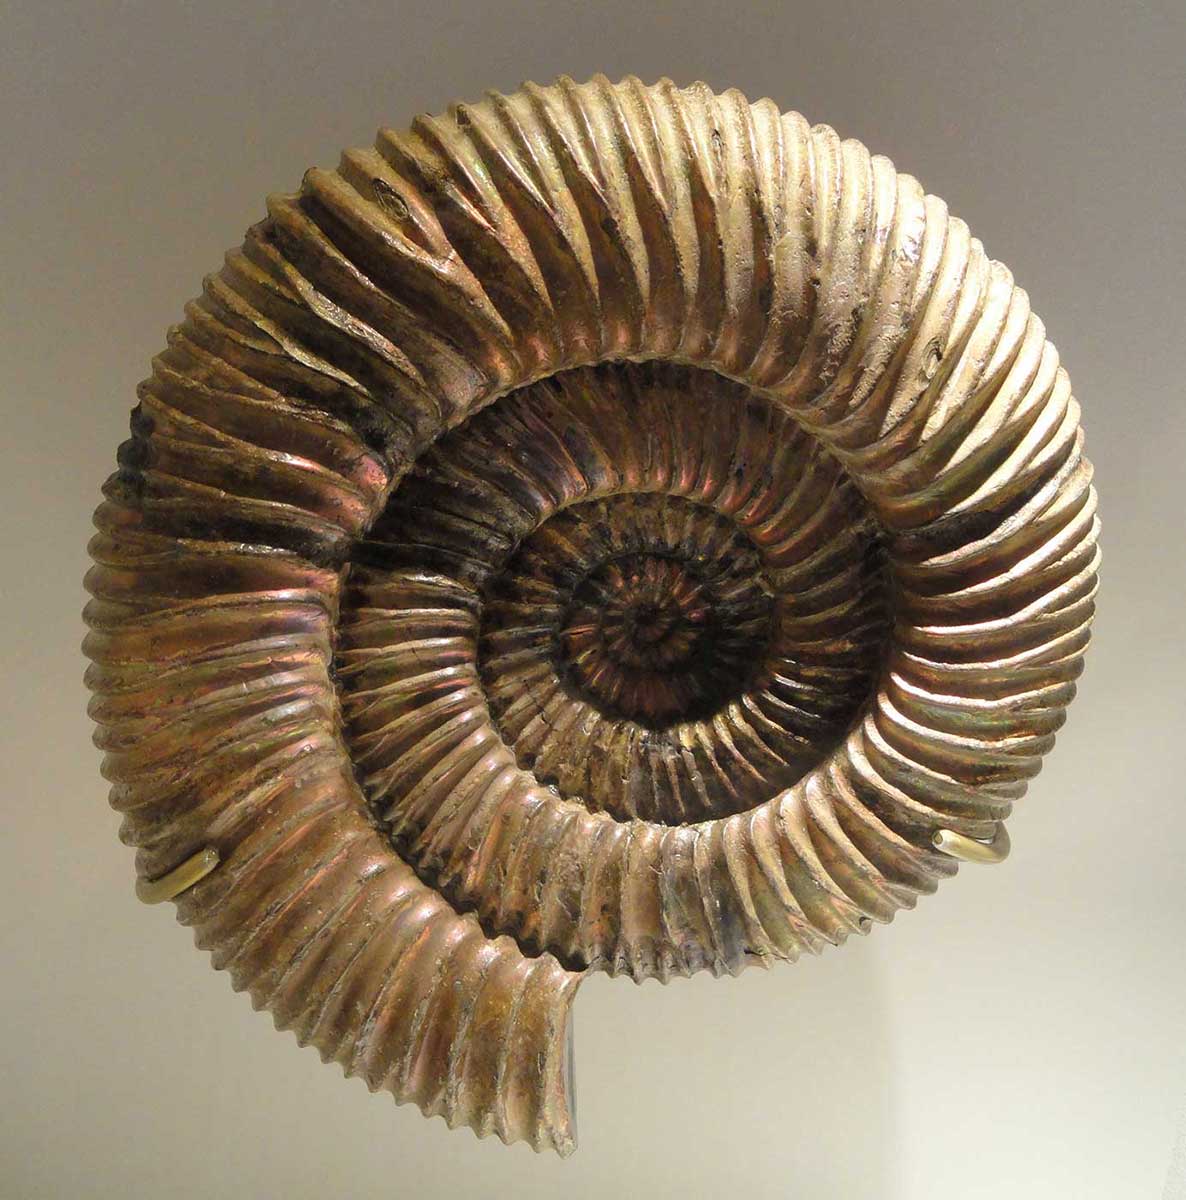 Colour photograph of a fossilised ribbed, spiralled shell. - click to view larger image